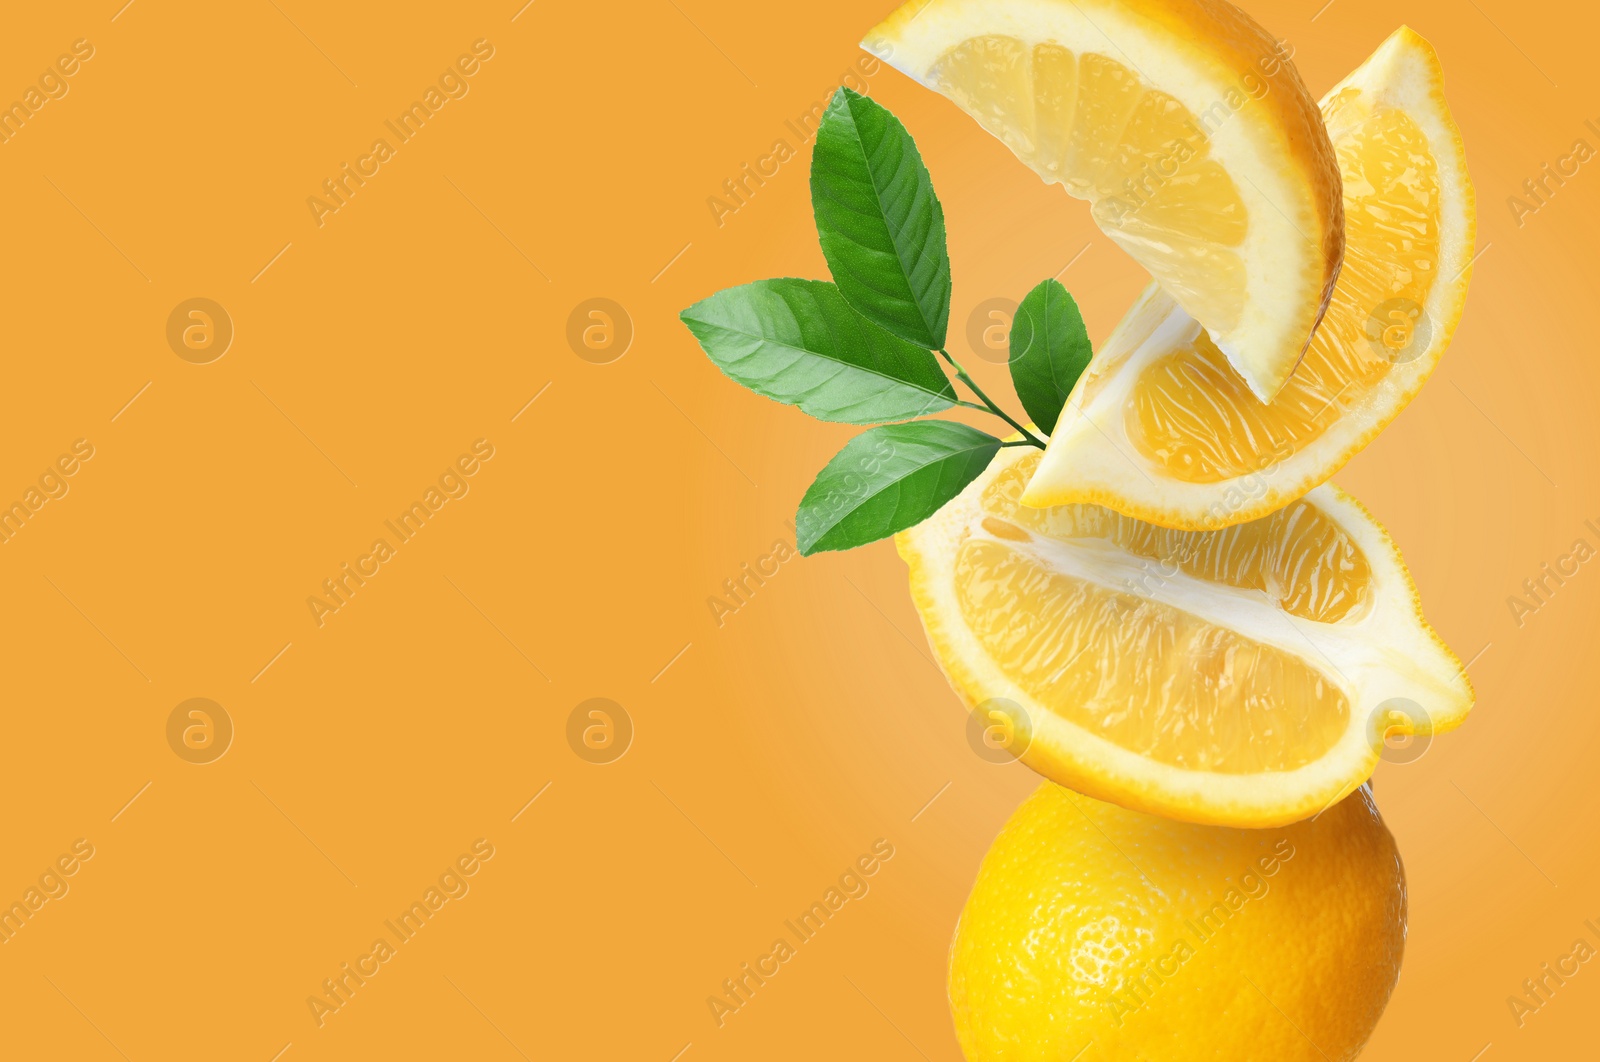 Image of Cut and whole fresh lemons with green leaves falling on orange background, space for text